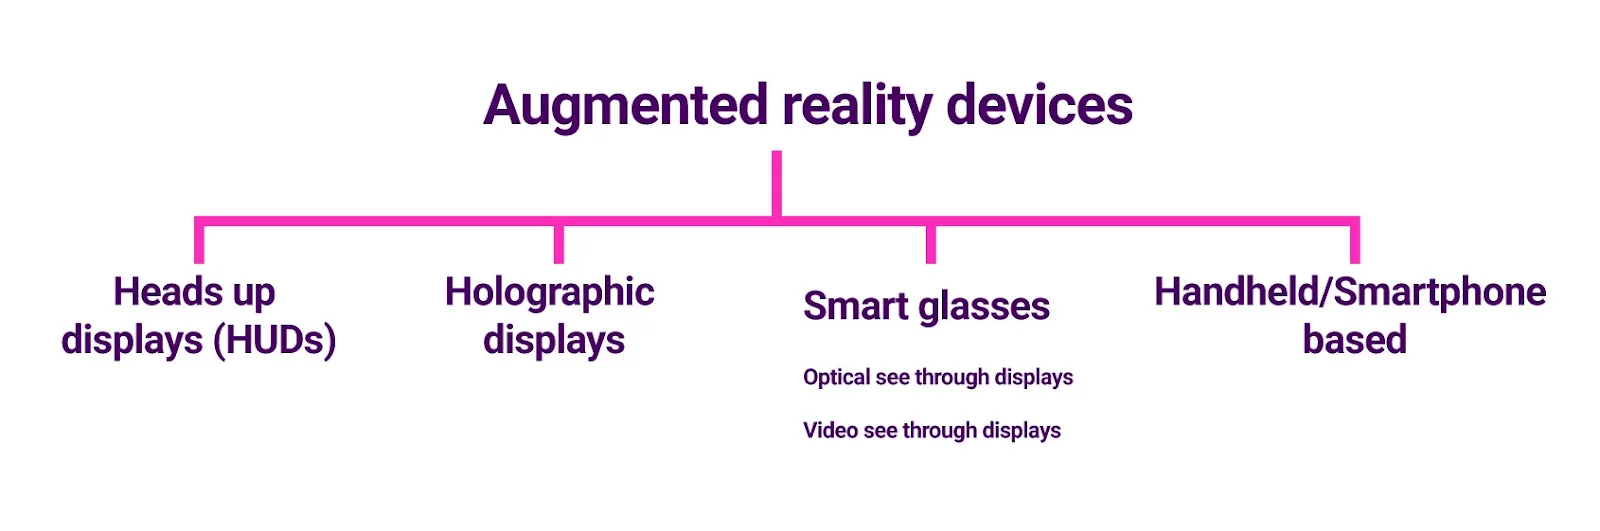 types of Augmented reality devices